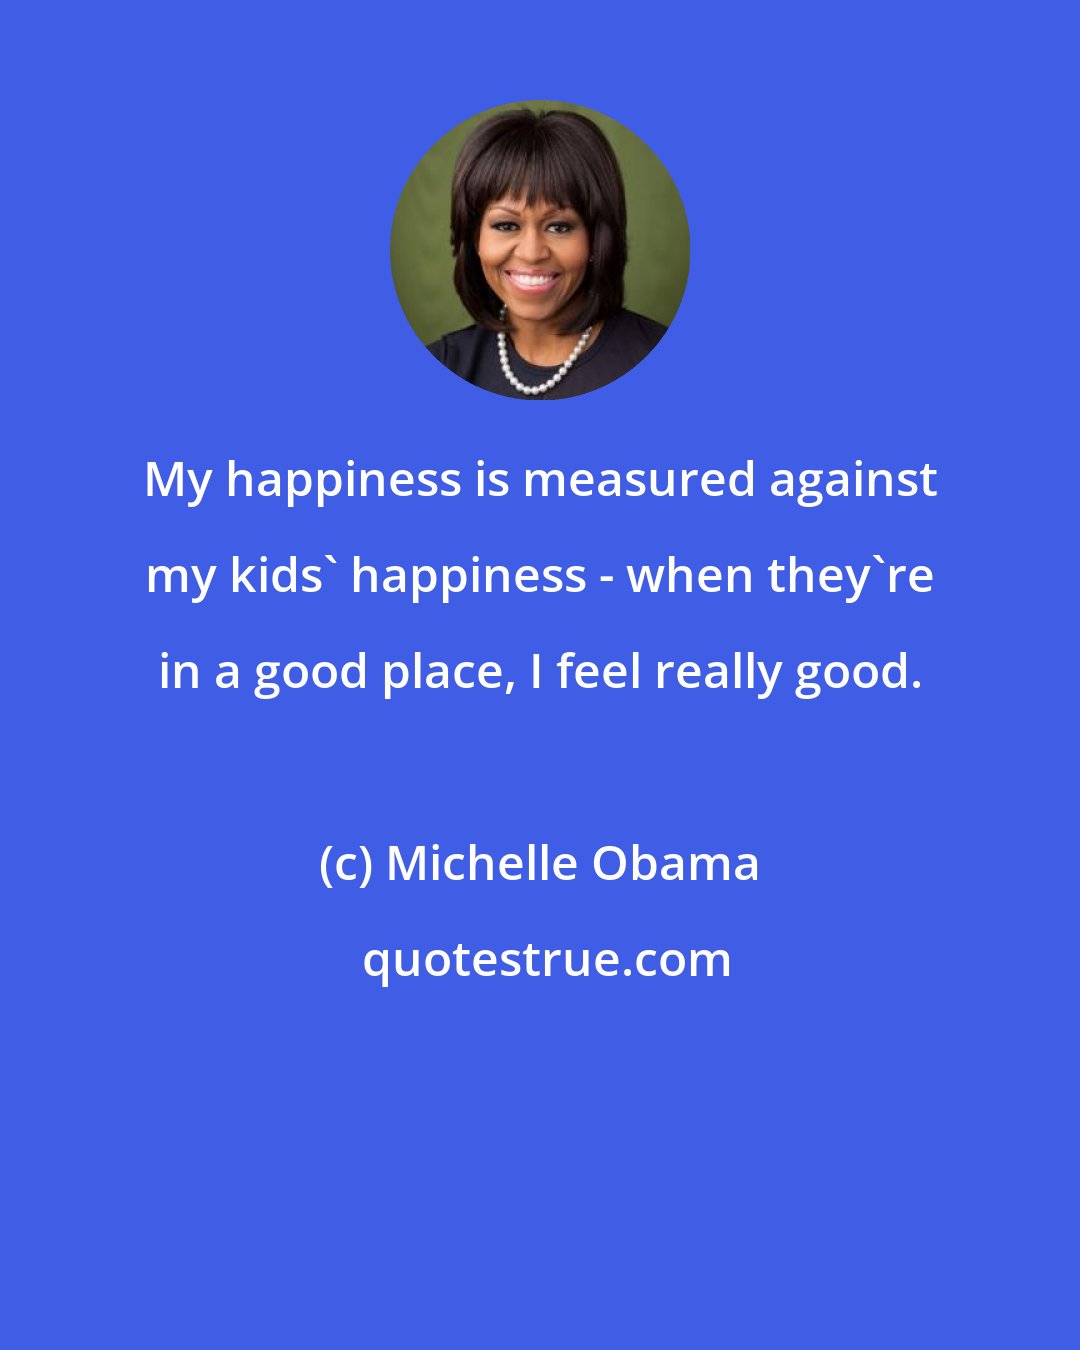 Michelle Obama: My happiness is measured against my kids' happiness - when they're in a good place, I feel really good.